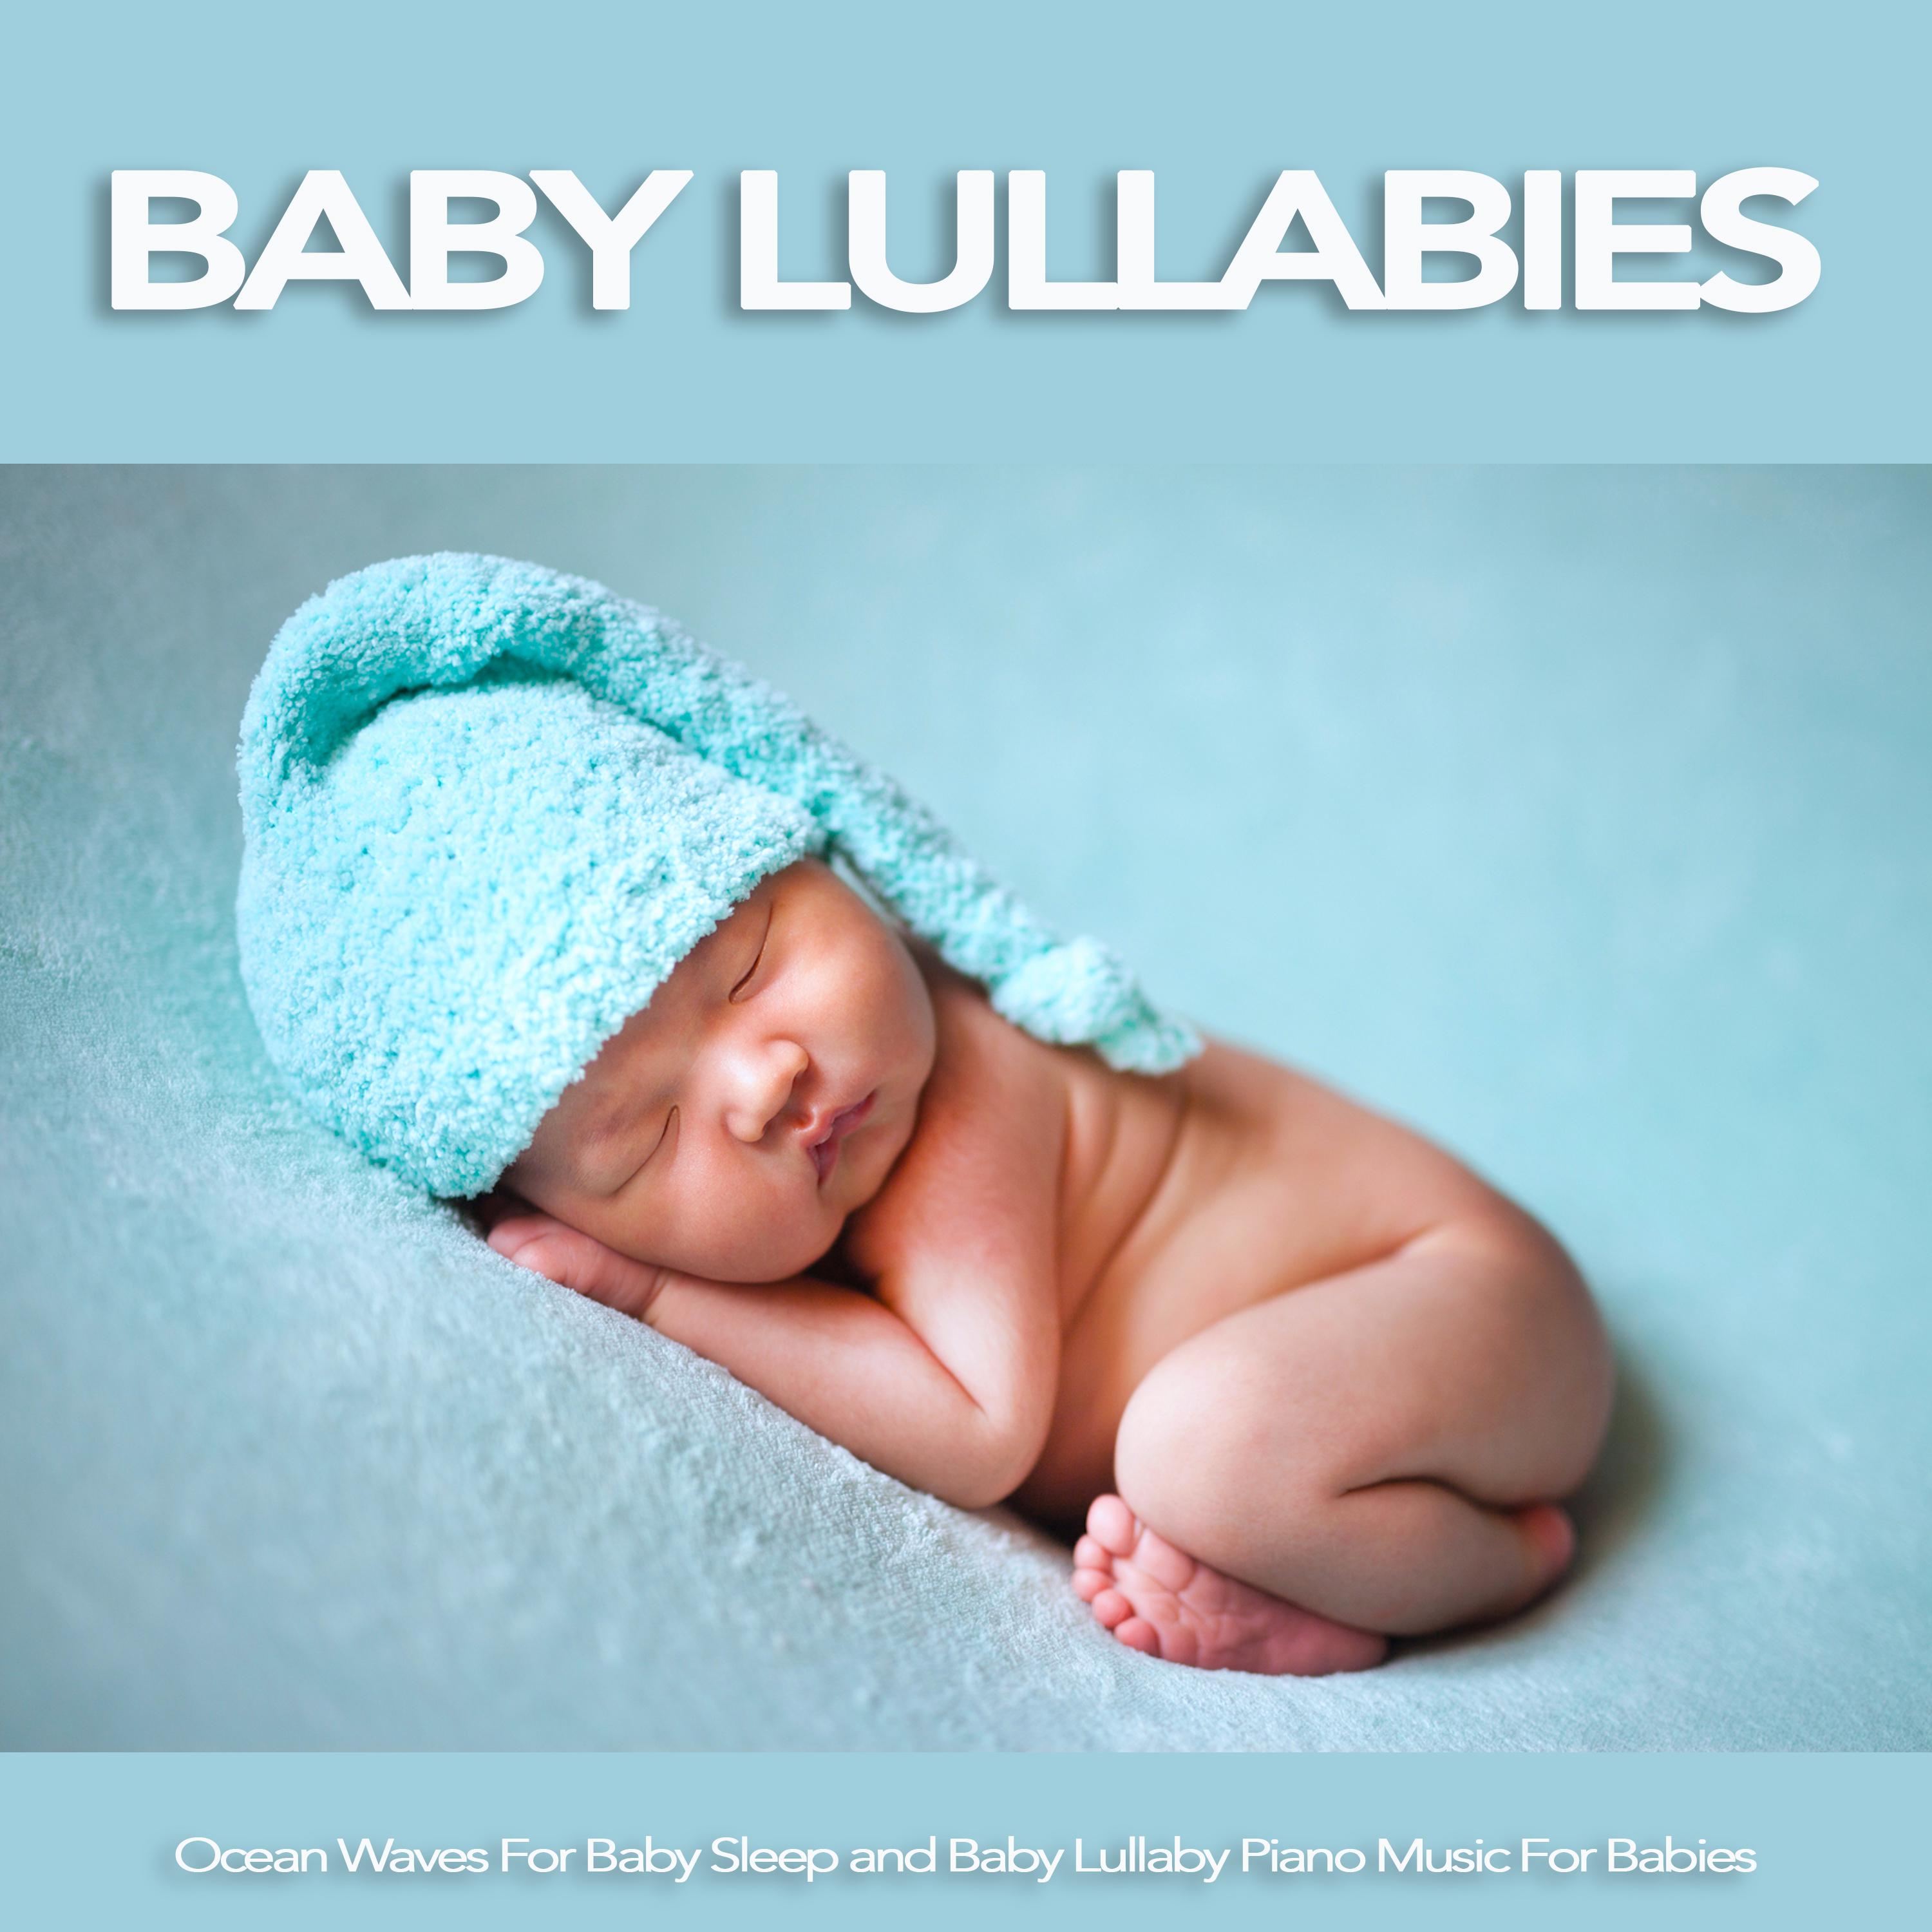 Baby Lullabies: Ocean Waves For Baby Sleep and Baby Lullaby Piano Music For Babies